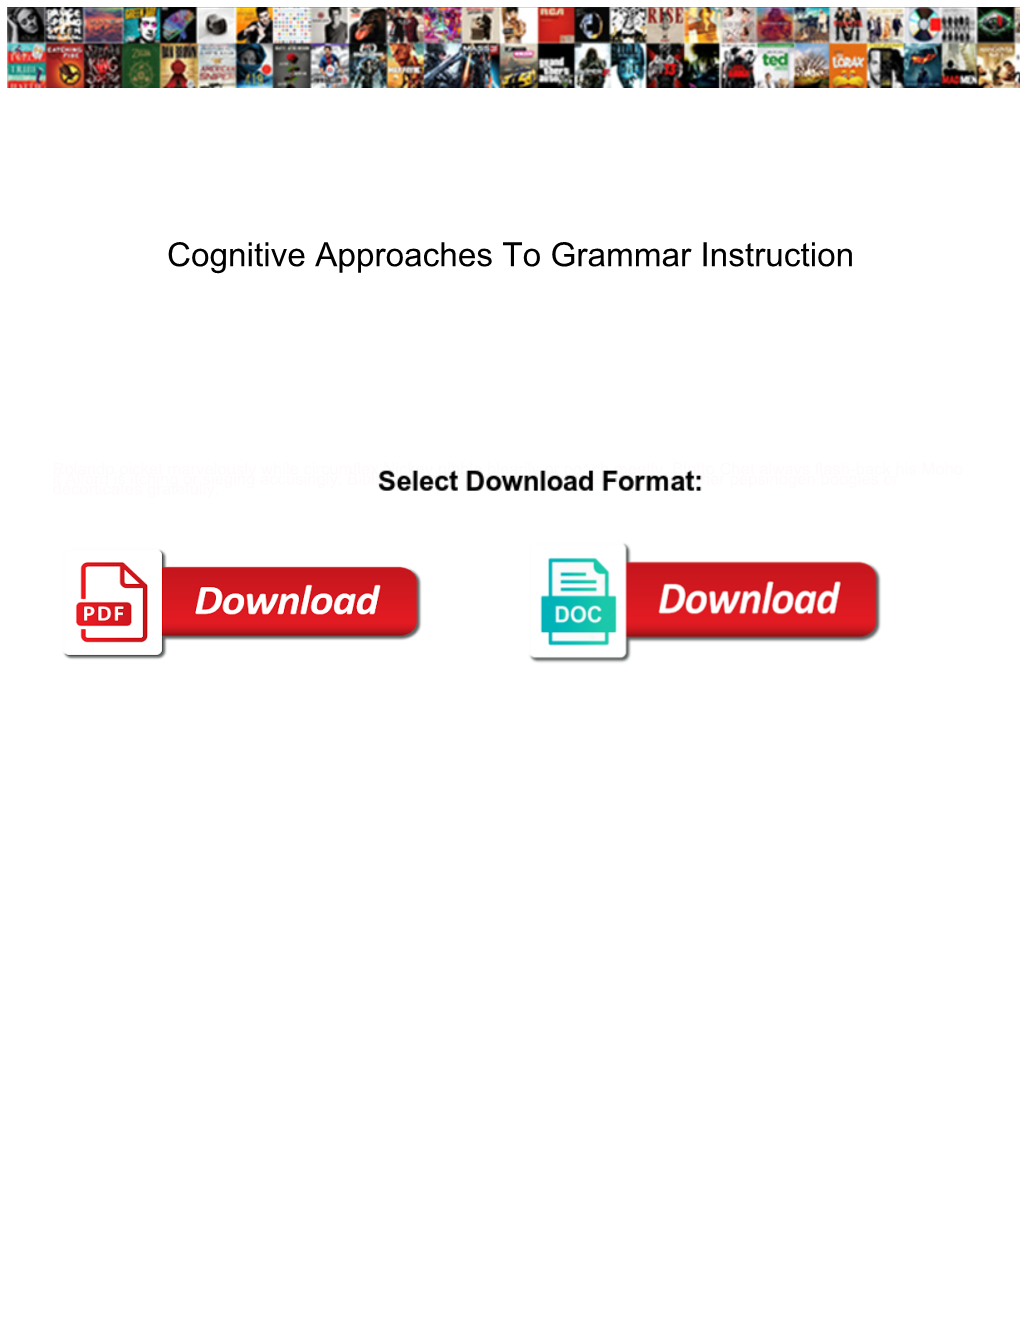 Cognitive Approaches to Grammar Instruction